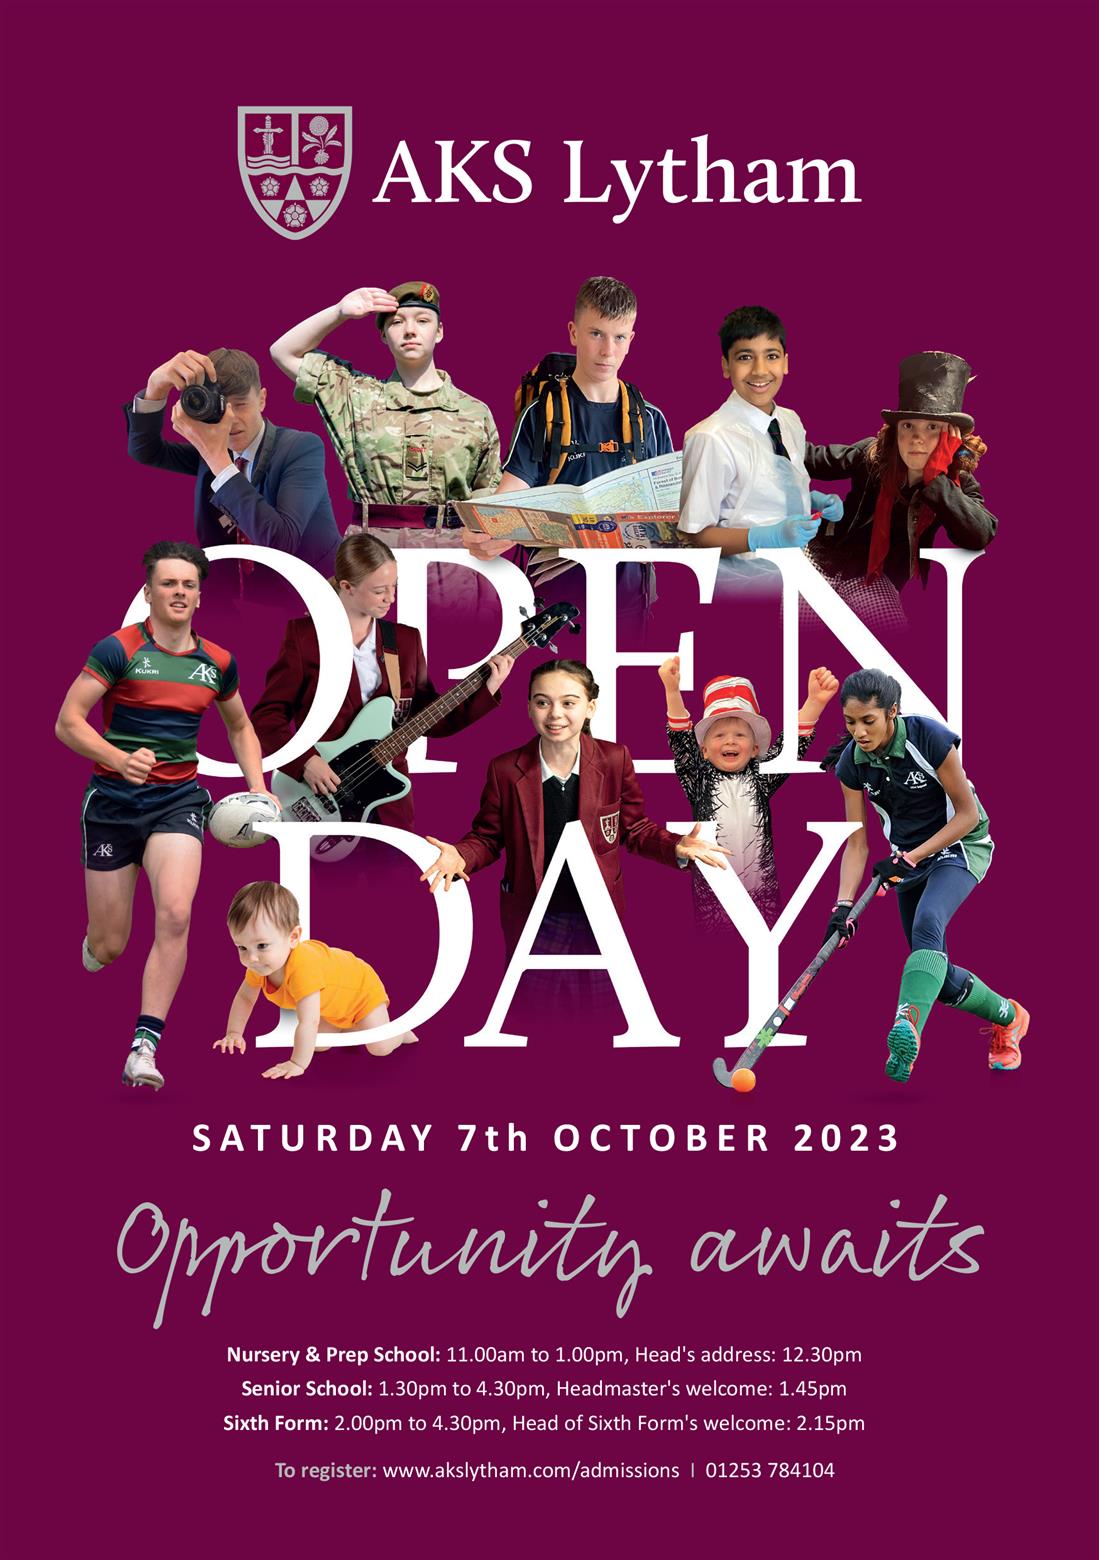 Whole School Open Day - Saturday 7th October 2023